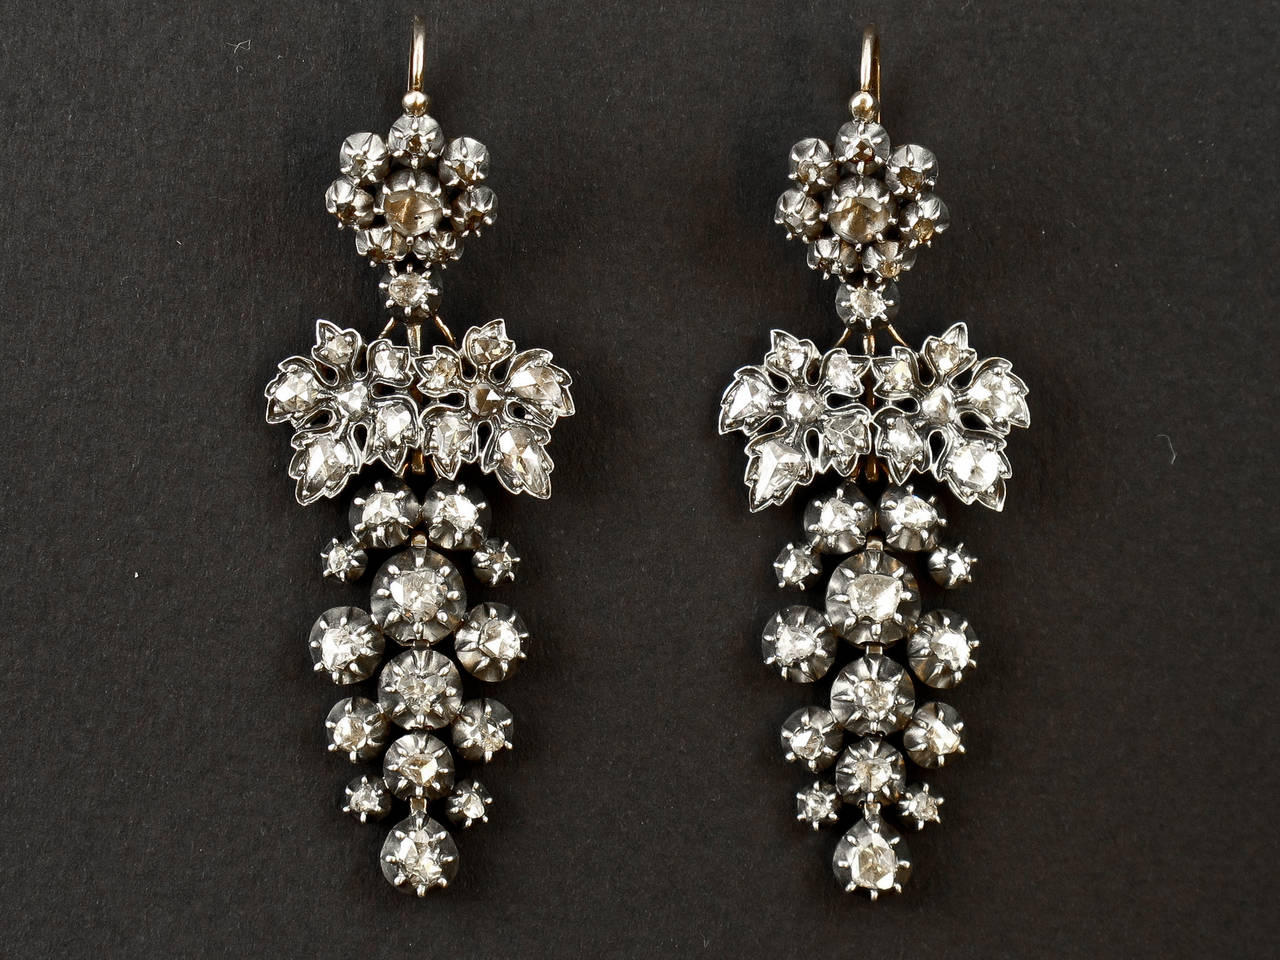 A pair of silver topped, yellow gold and rose-cut diamond ear pendents. Of vine leaf design. Day and night, the upper part can be worn without the leaves and the bunch or alone. Probably French, 1860 c.a.